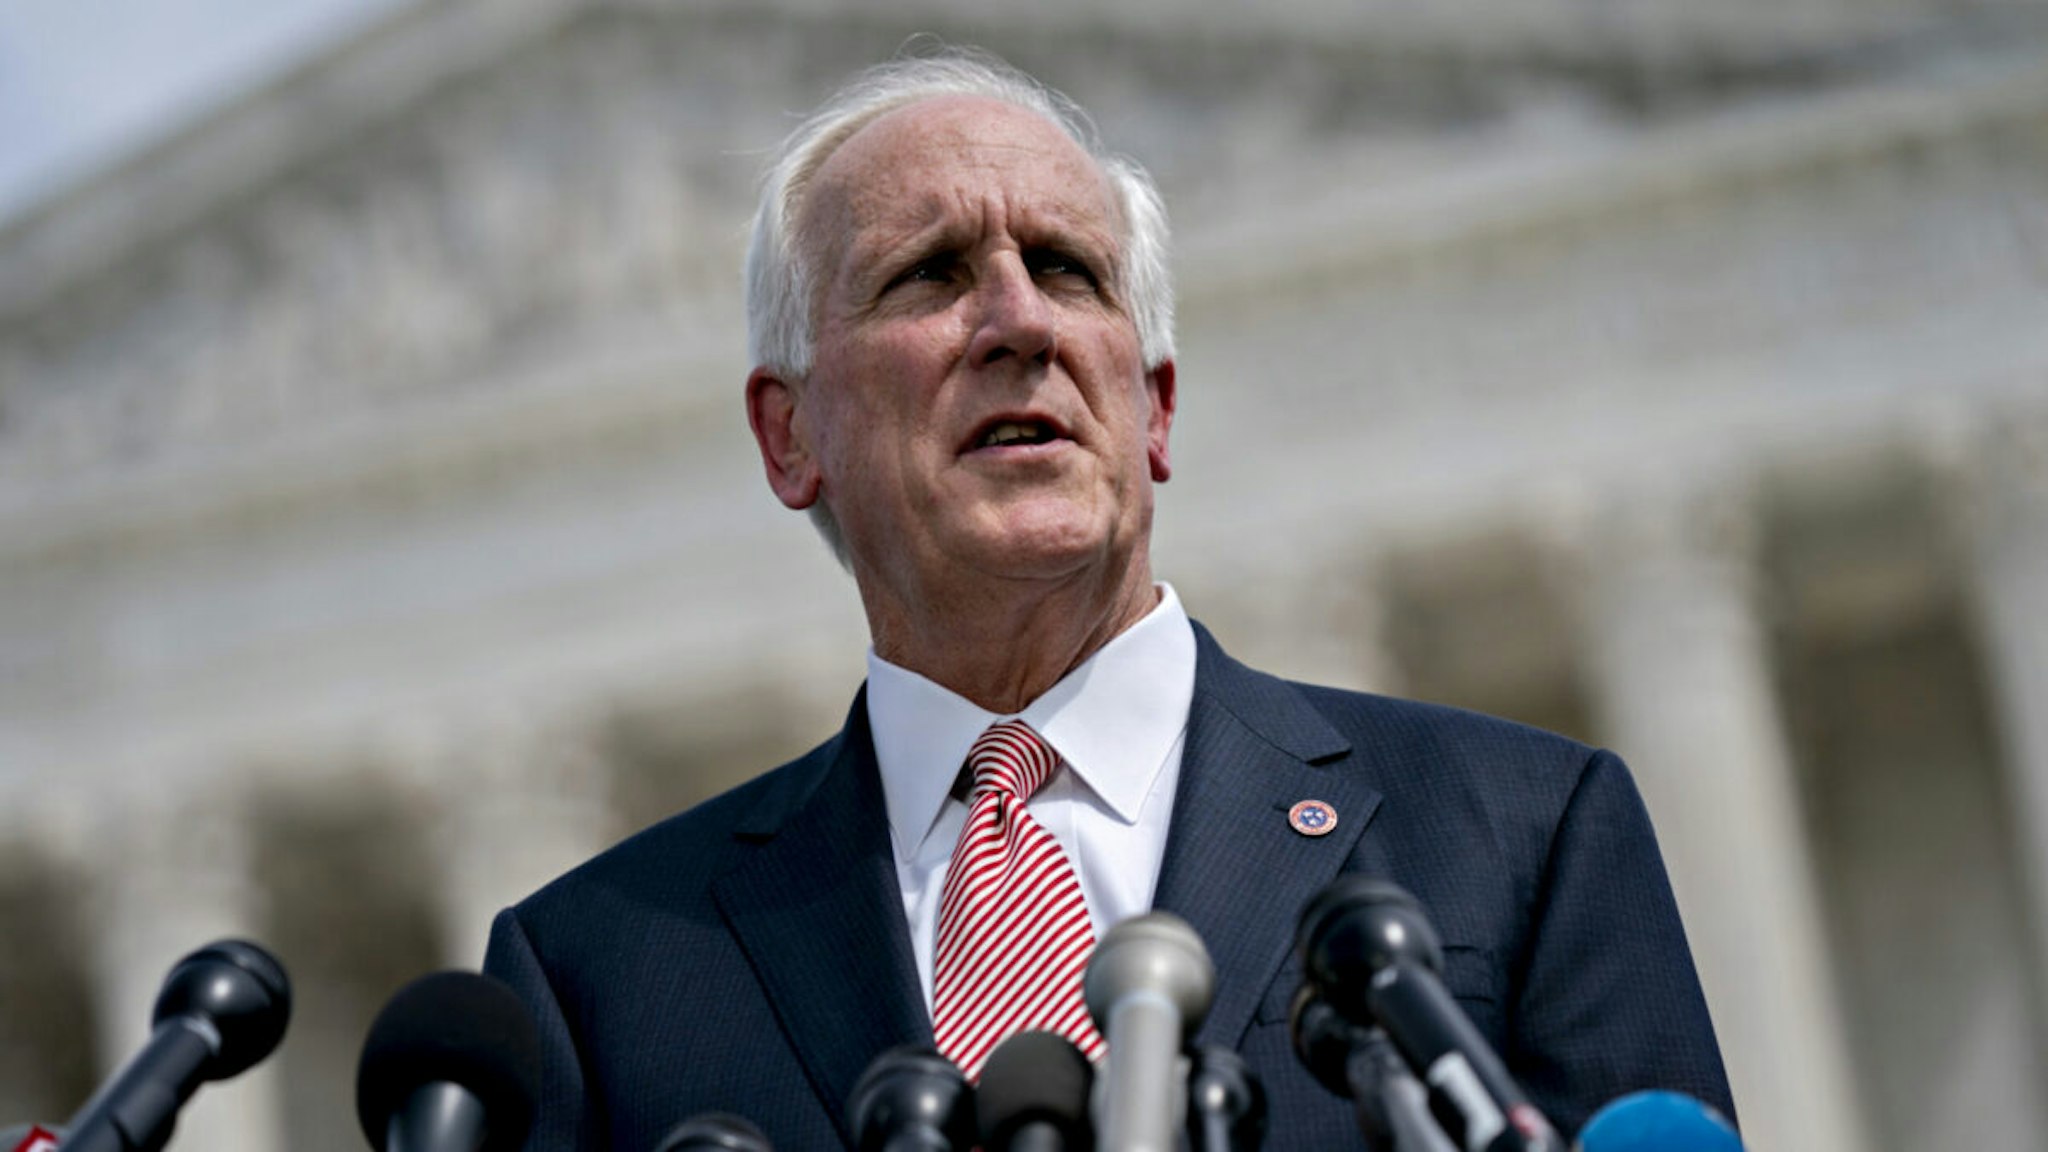 Herbert Slatery III, Tennessee attorney general, speaks during a news conference outside the Supreme Court in Washington, D.C., U.S., on Monday, Sept. 9, 2019.